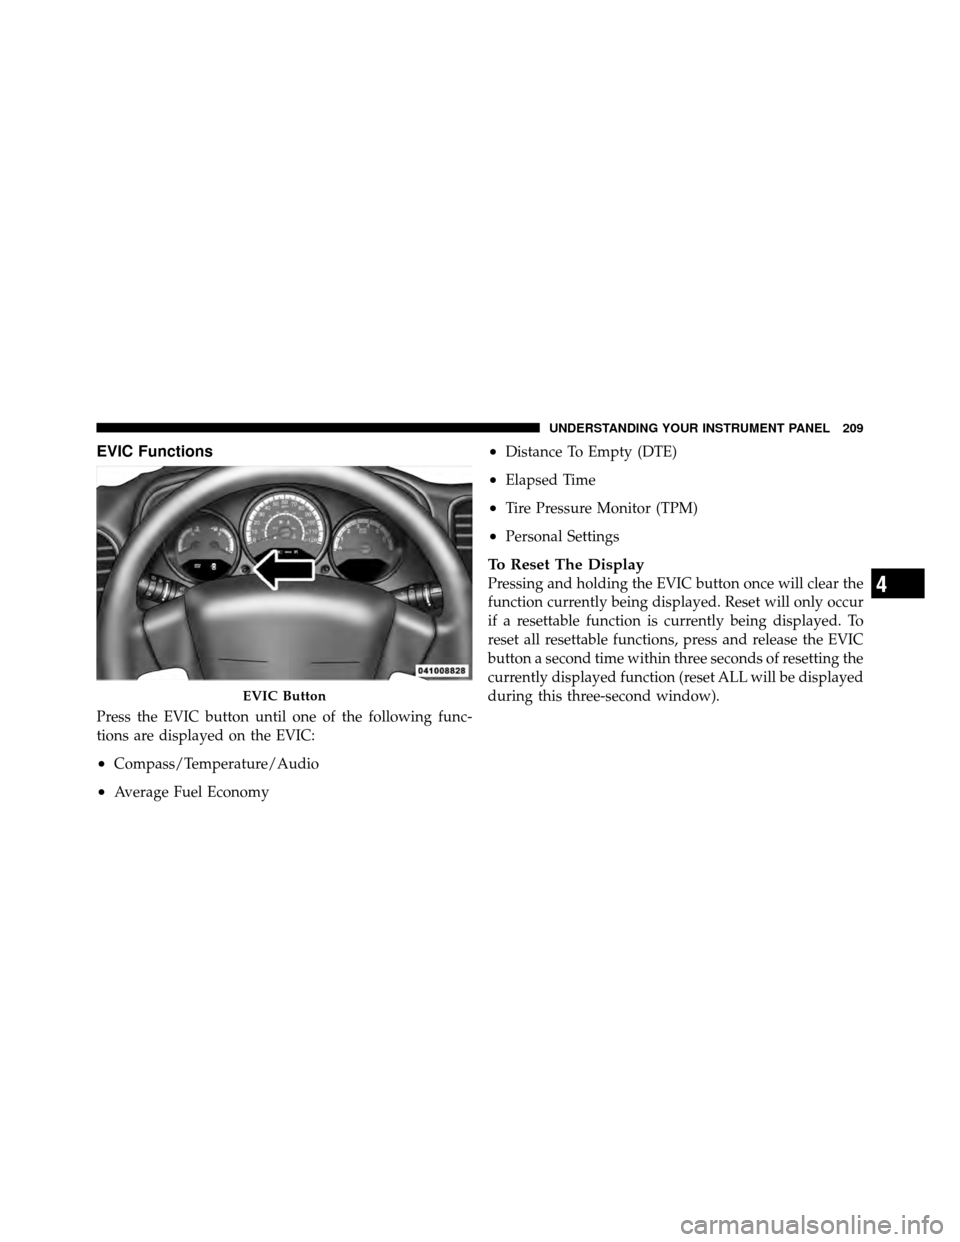 DODGE CALIBER 2010 1.G Owners Manual EVIC Functions
Press the EVIC button until one of the following func-
tions are displayed on the EVIC:
•Compass/Temperature/Audio
•Average Fuel Economy
•Distance To Empty (DTE)
•Elapsed Time
�